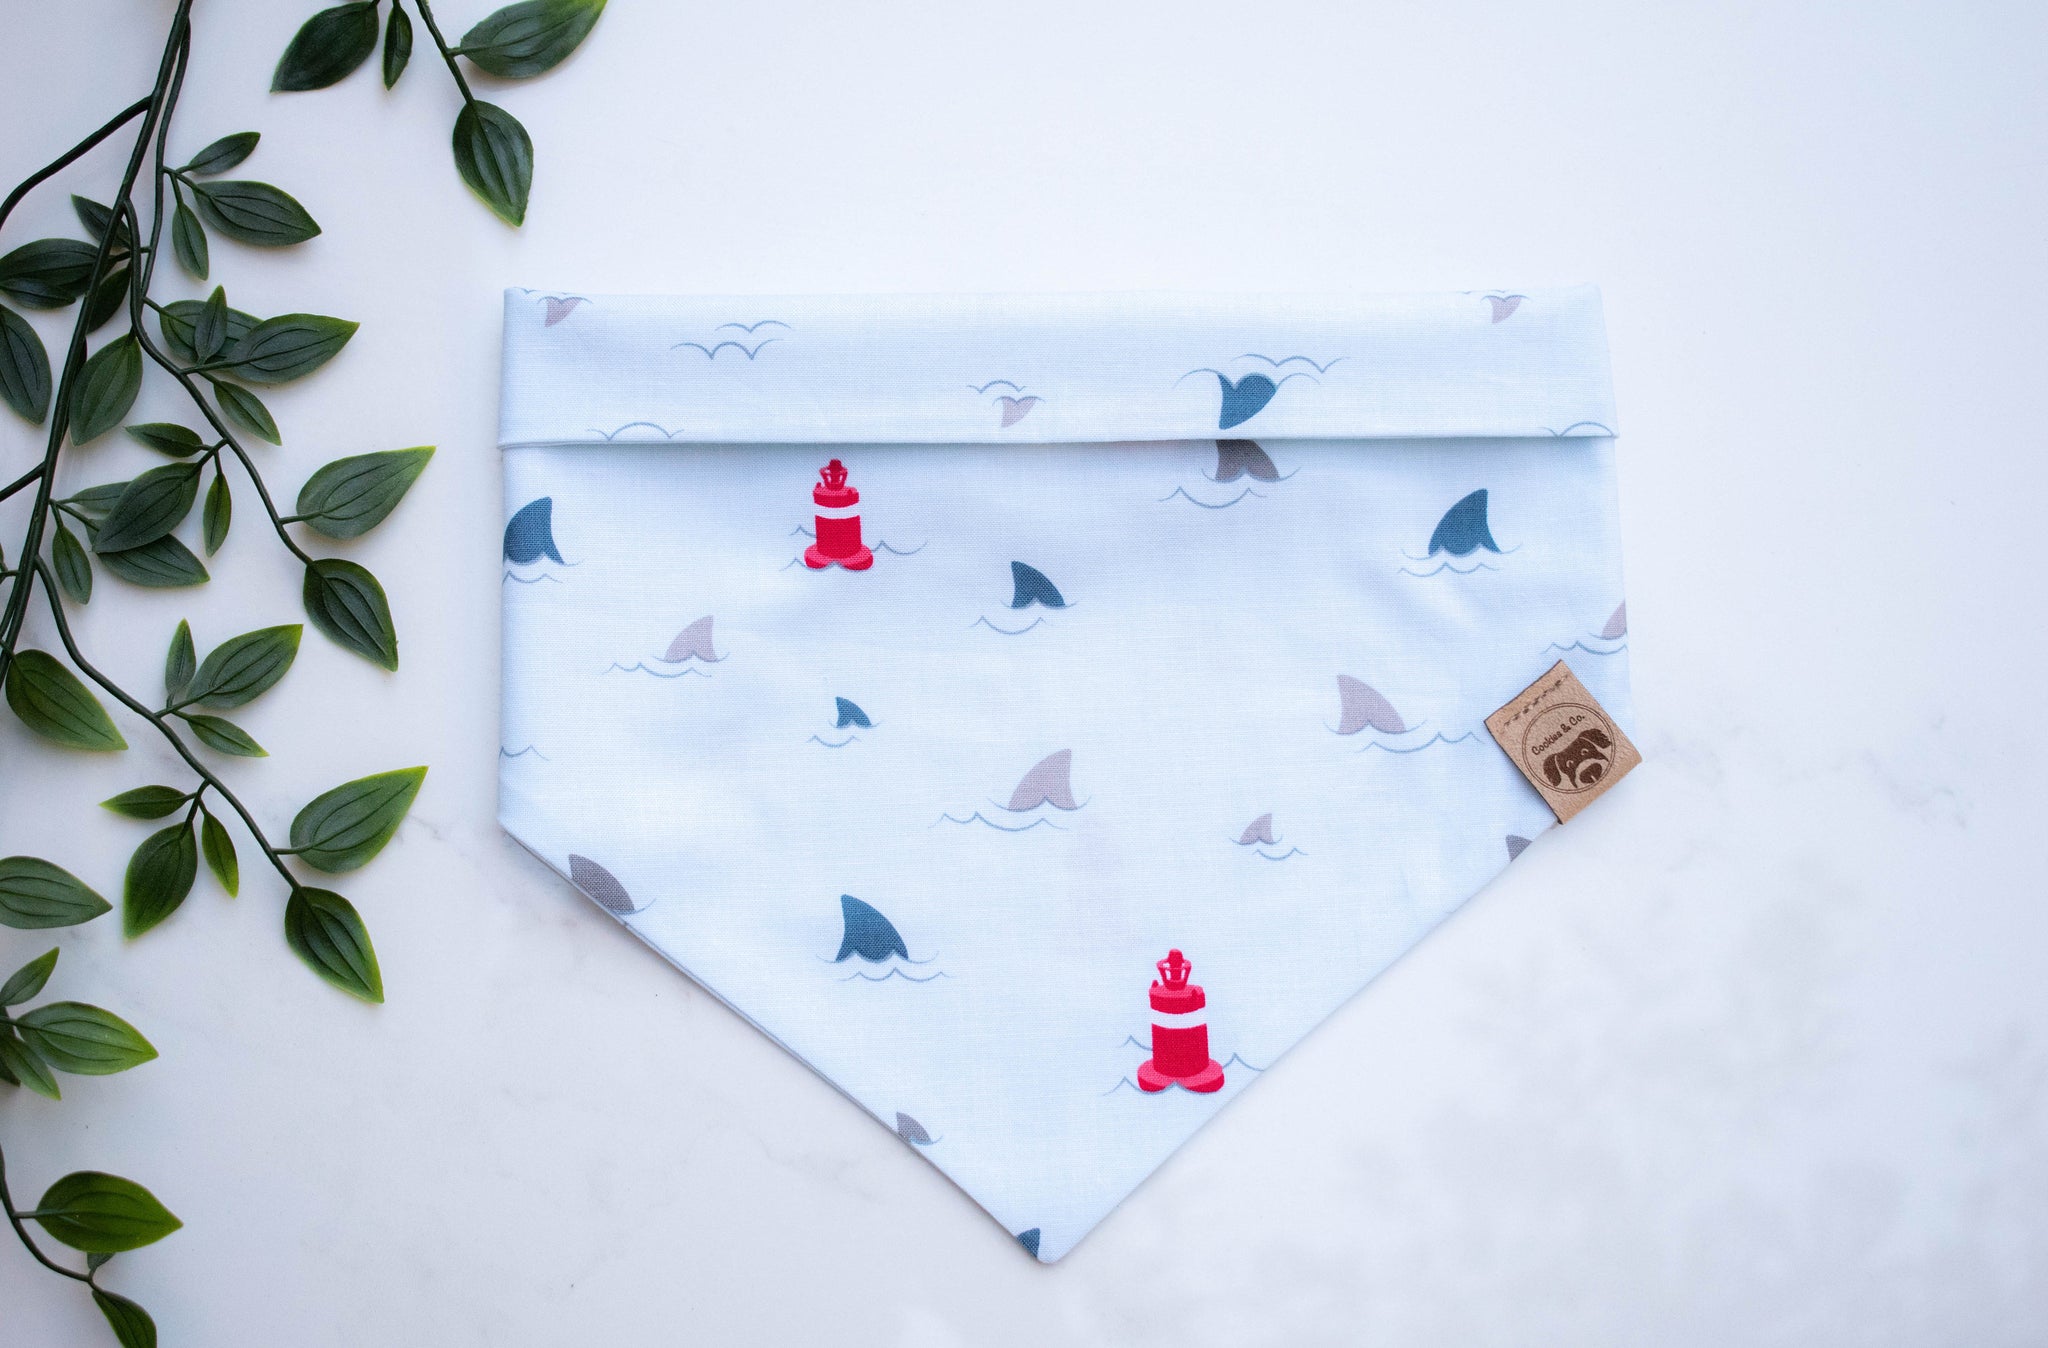 Shark Week bandana print, featuring multiple shark fins above water surface, with red floating buoys on a light blue fabric